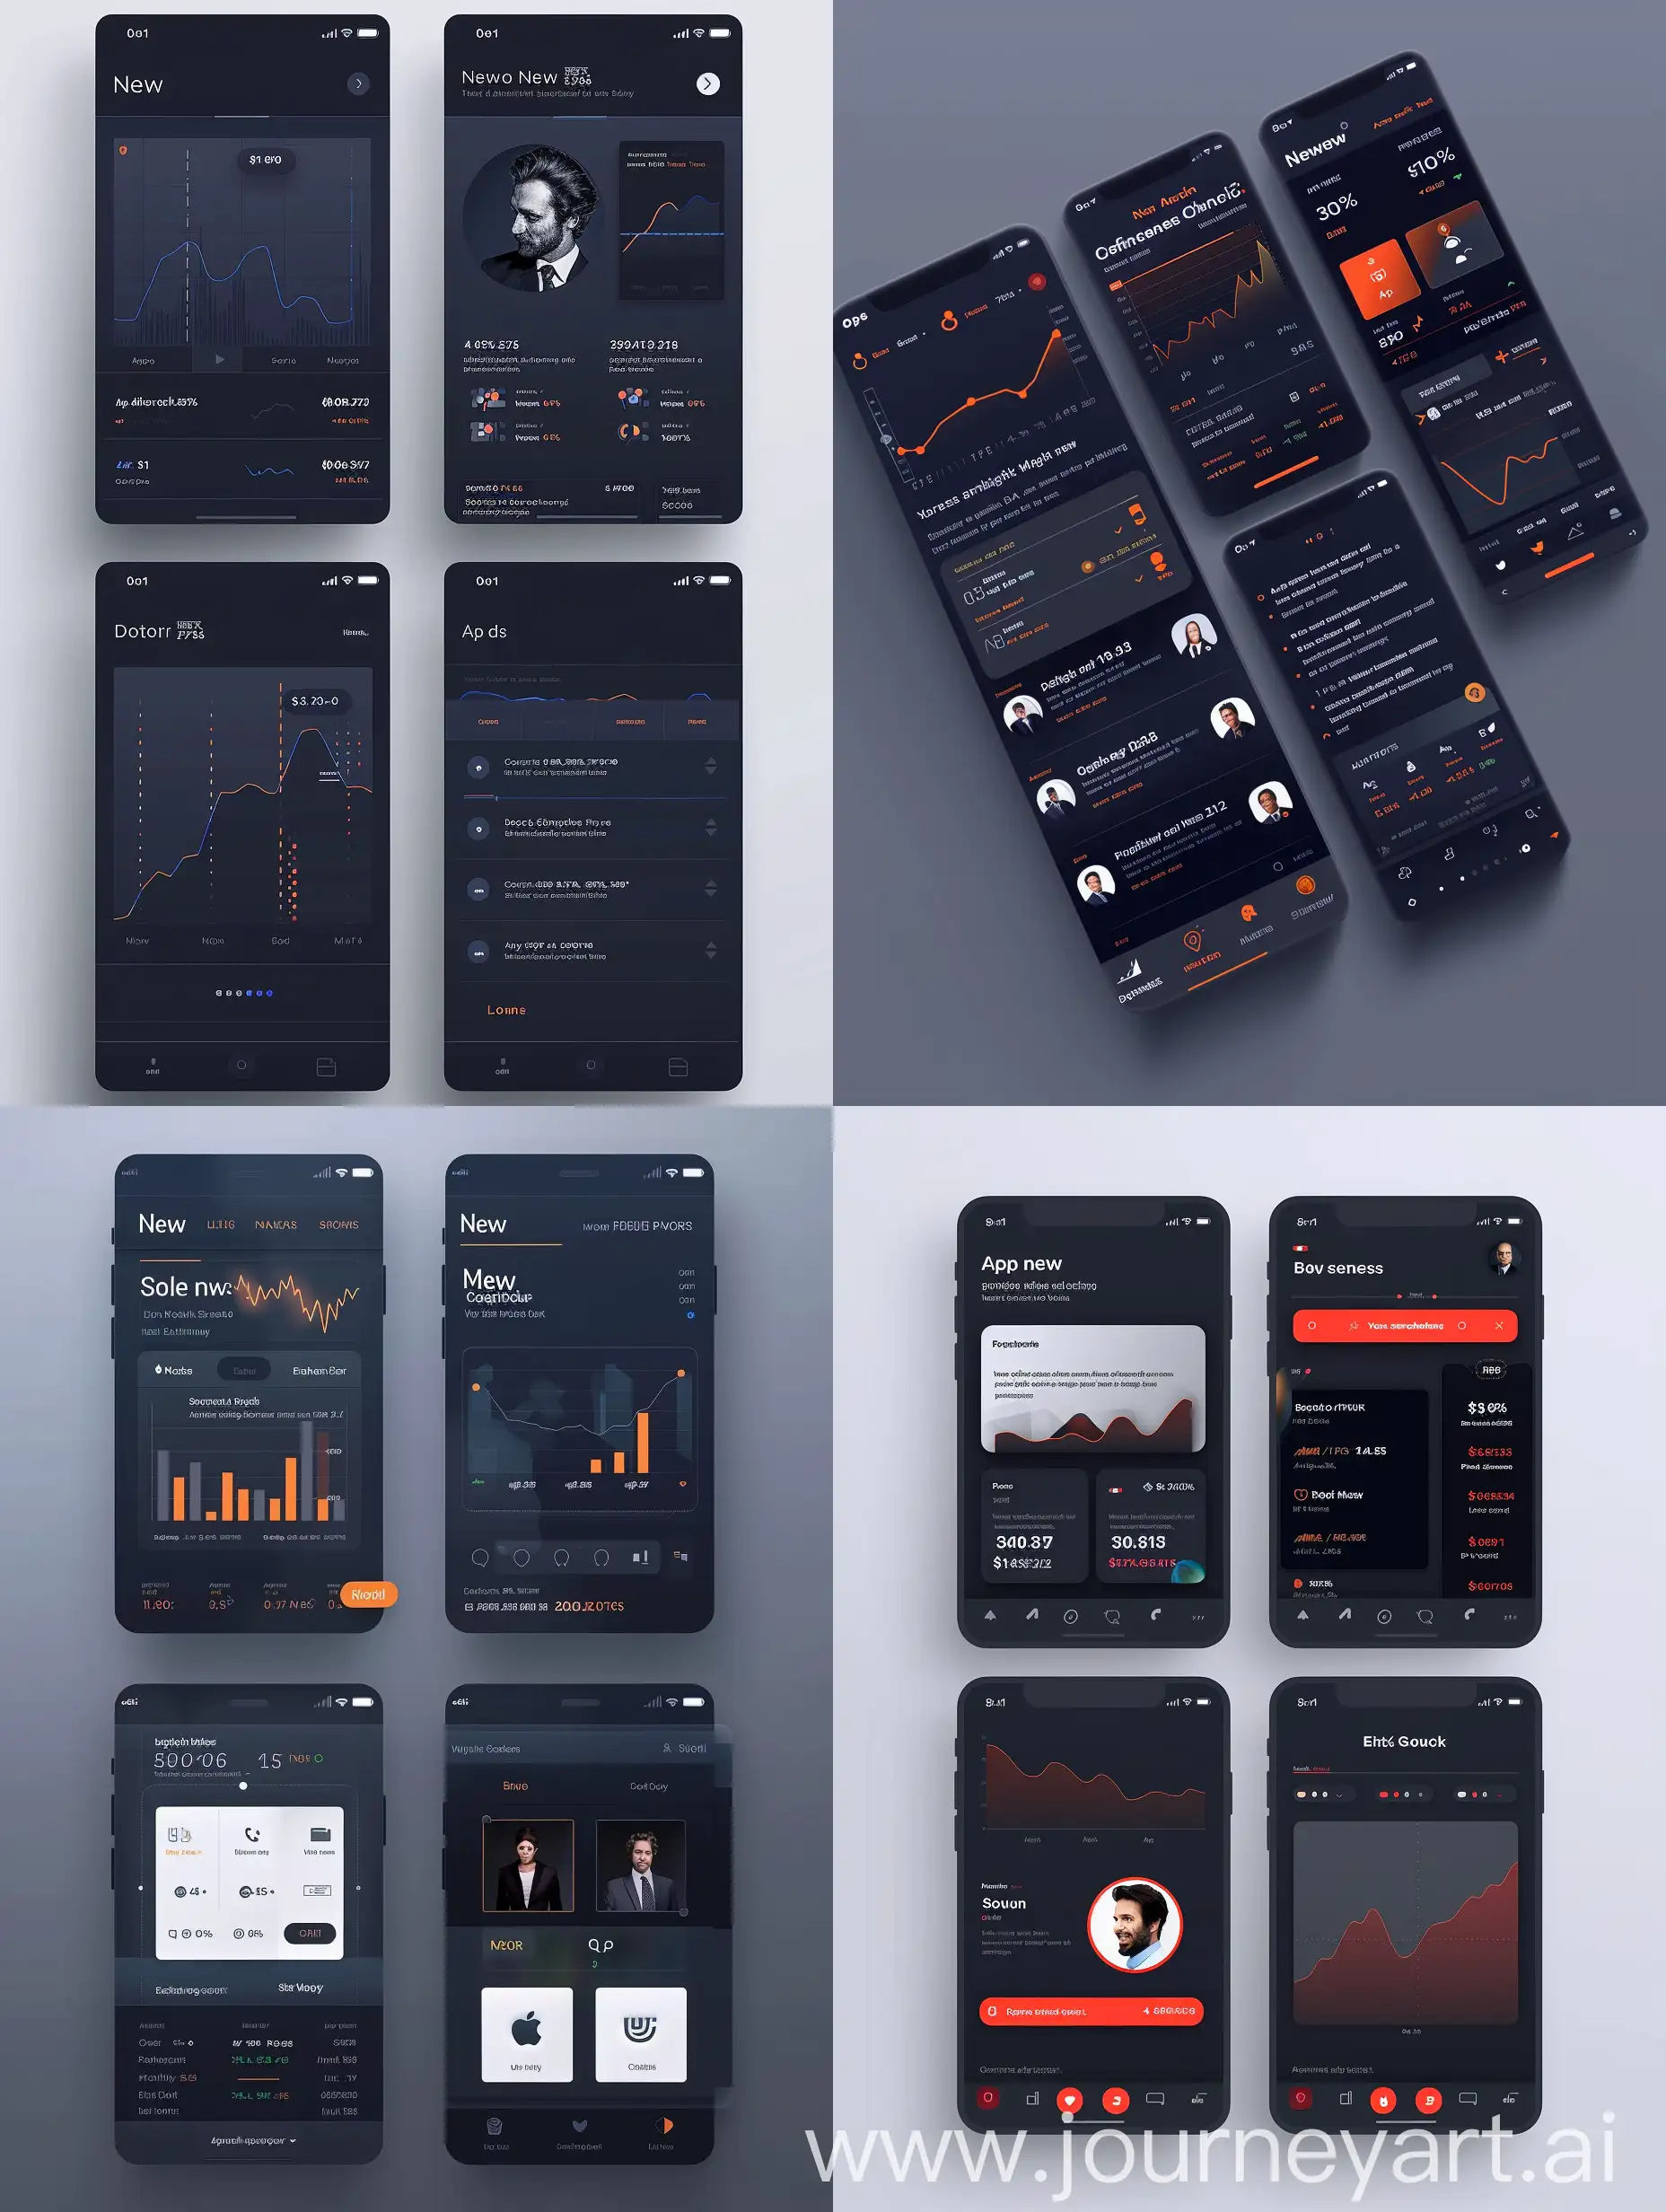 create a mobile app UI design for a finance news app, the app has to be four pages: main page with the news, a second page with the portfolio, a third page with the profile of the investor and a last page with the configs